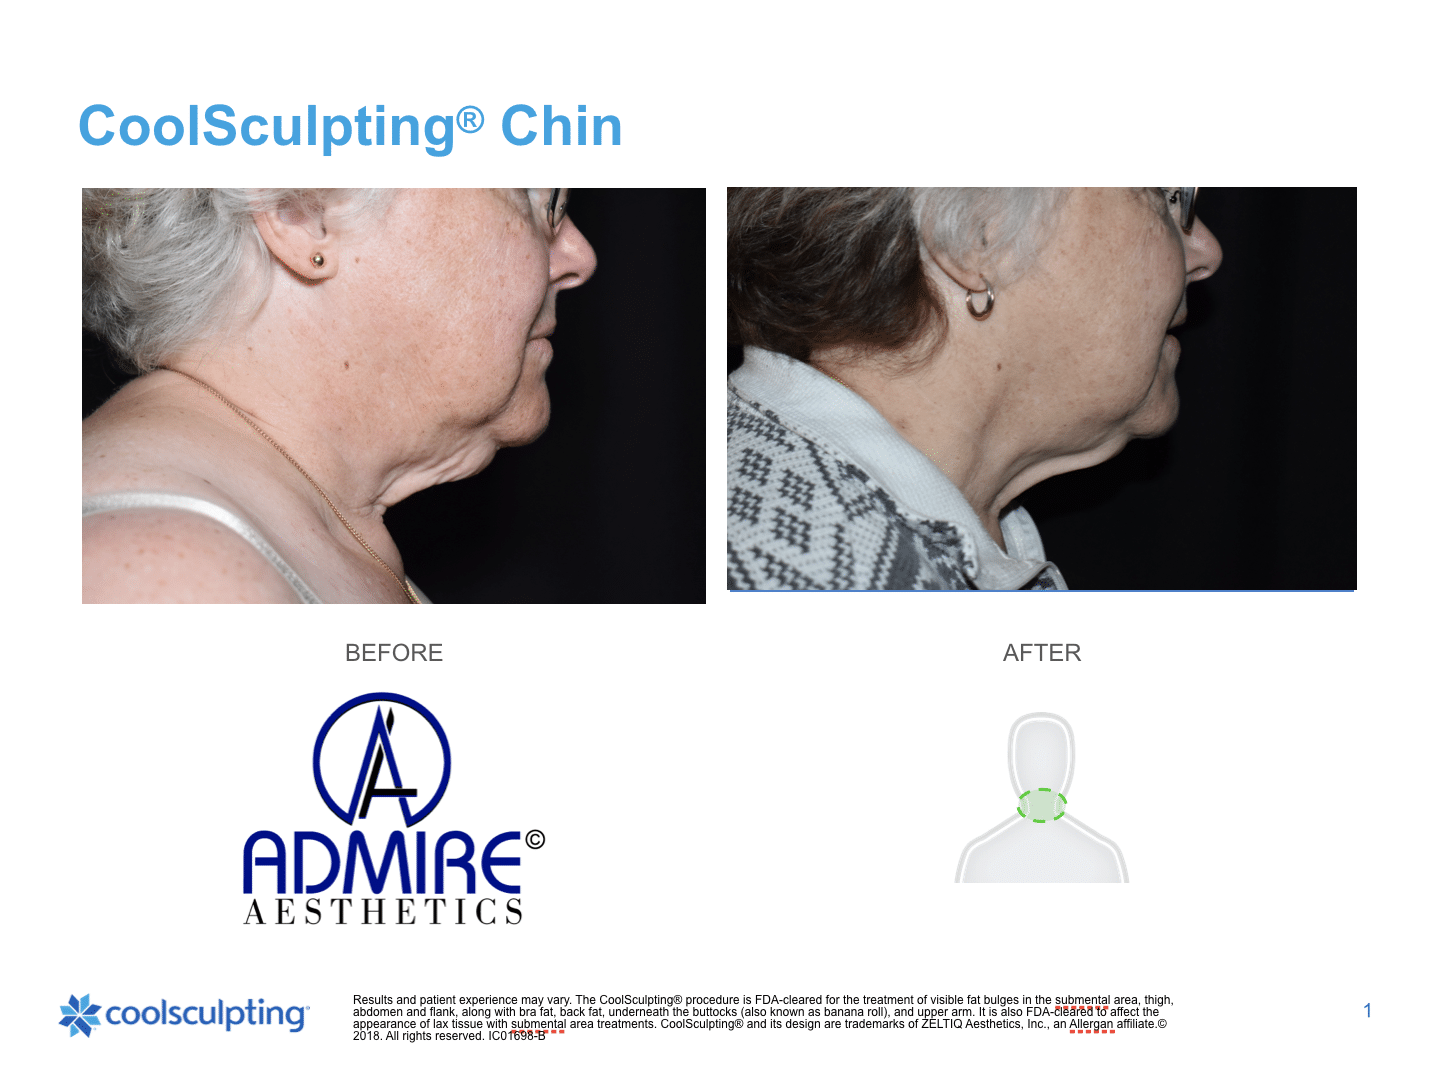 Woman's before and after coolsculpting treatment to submental chin area by Admire Aesthetics in Medford, OR.